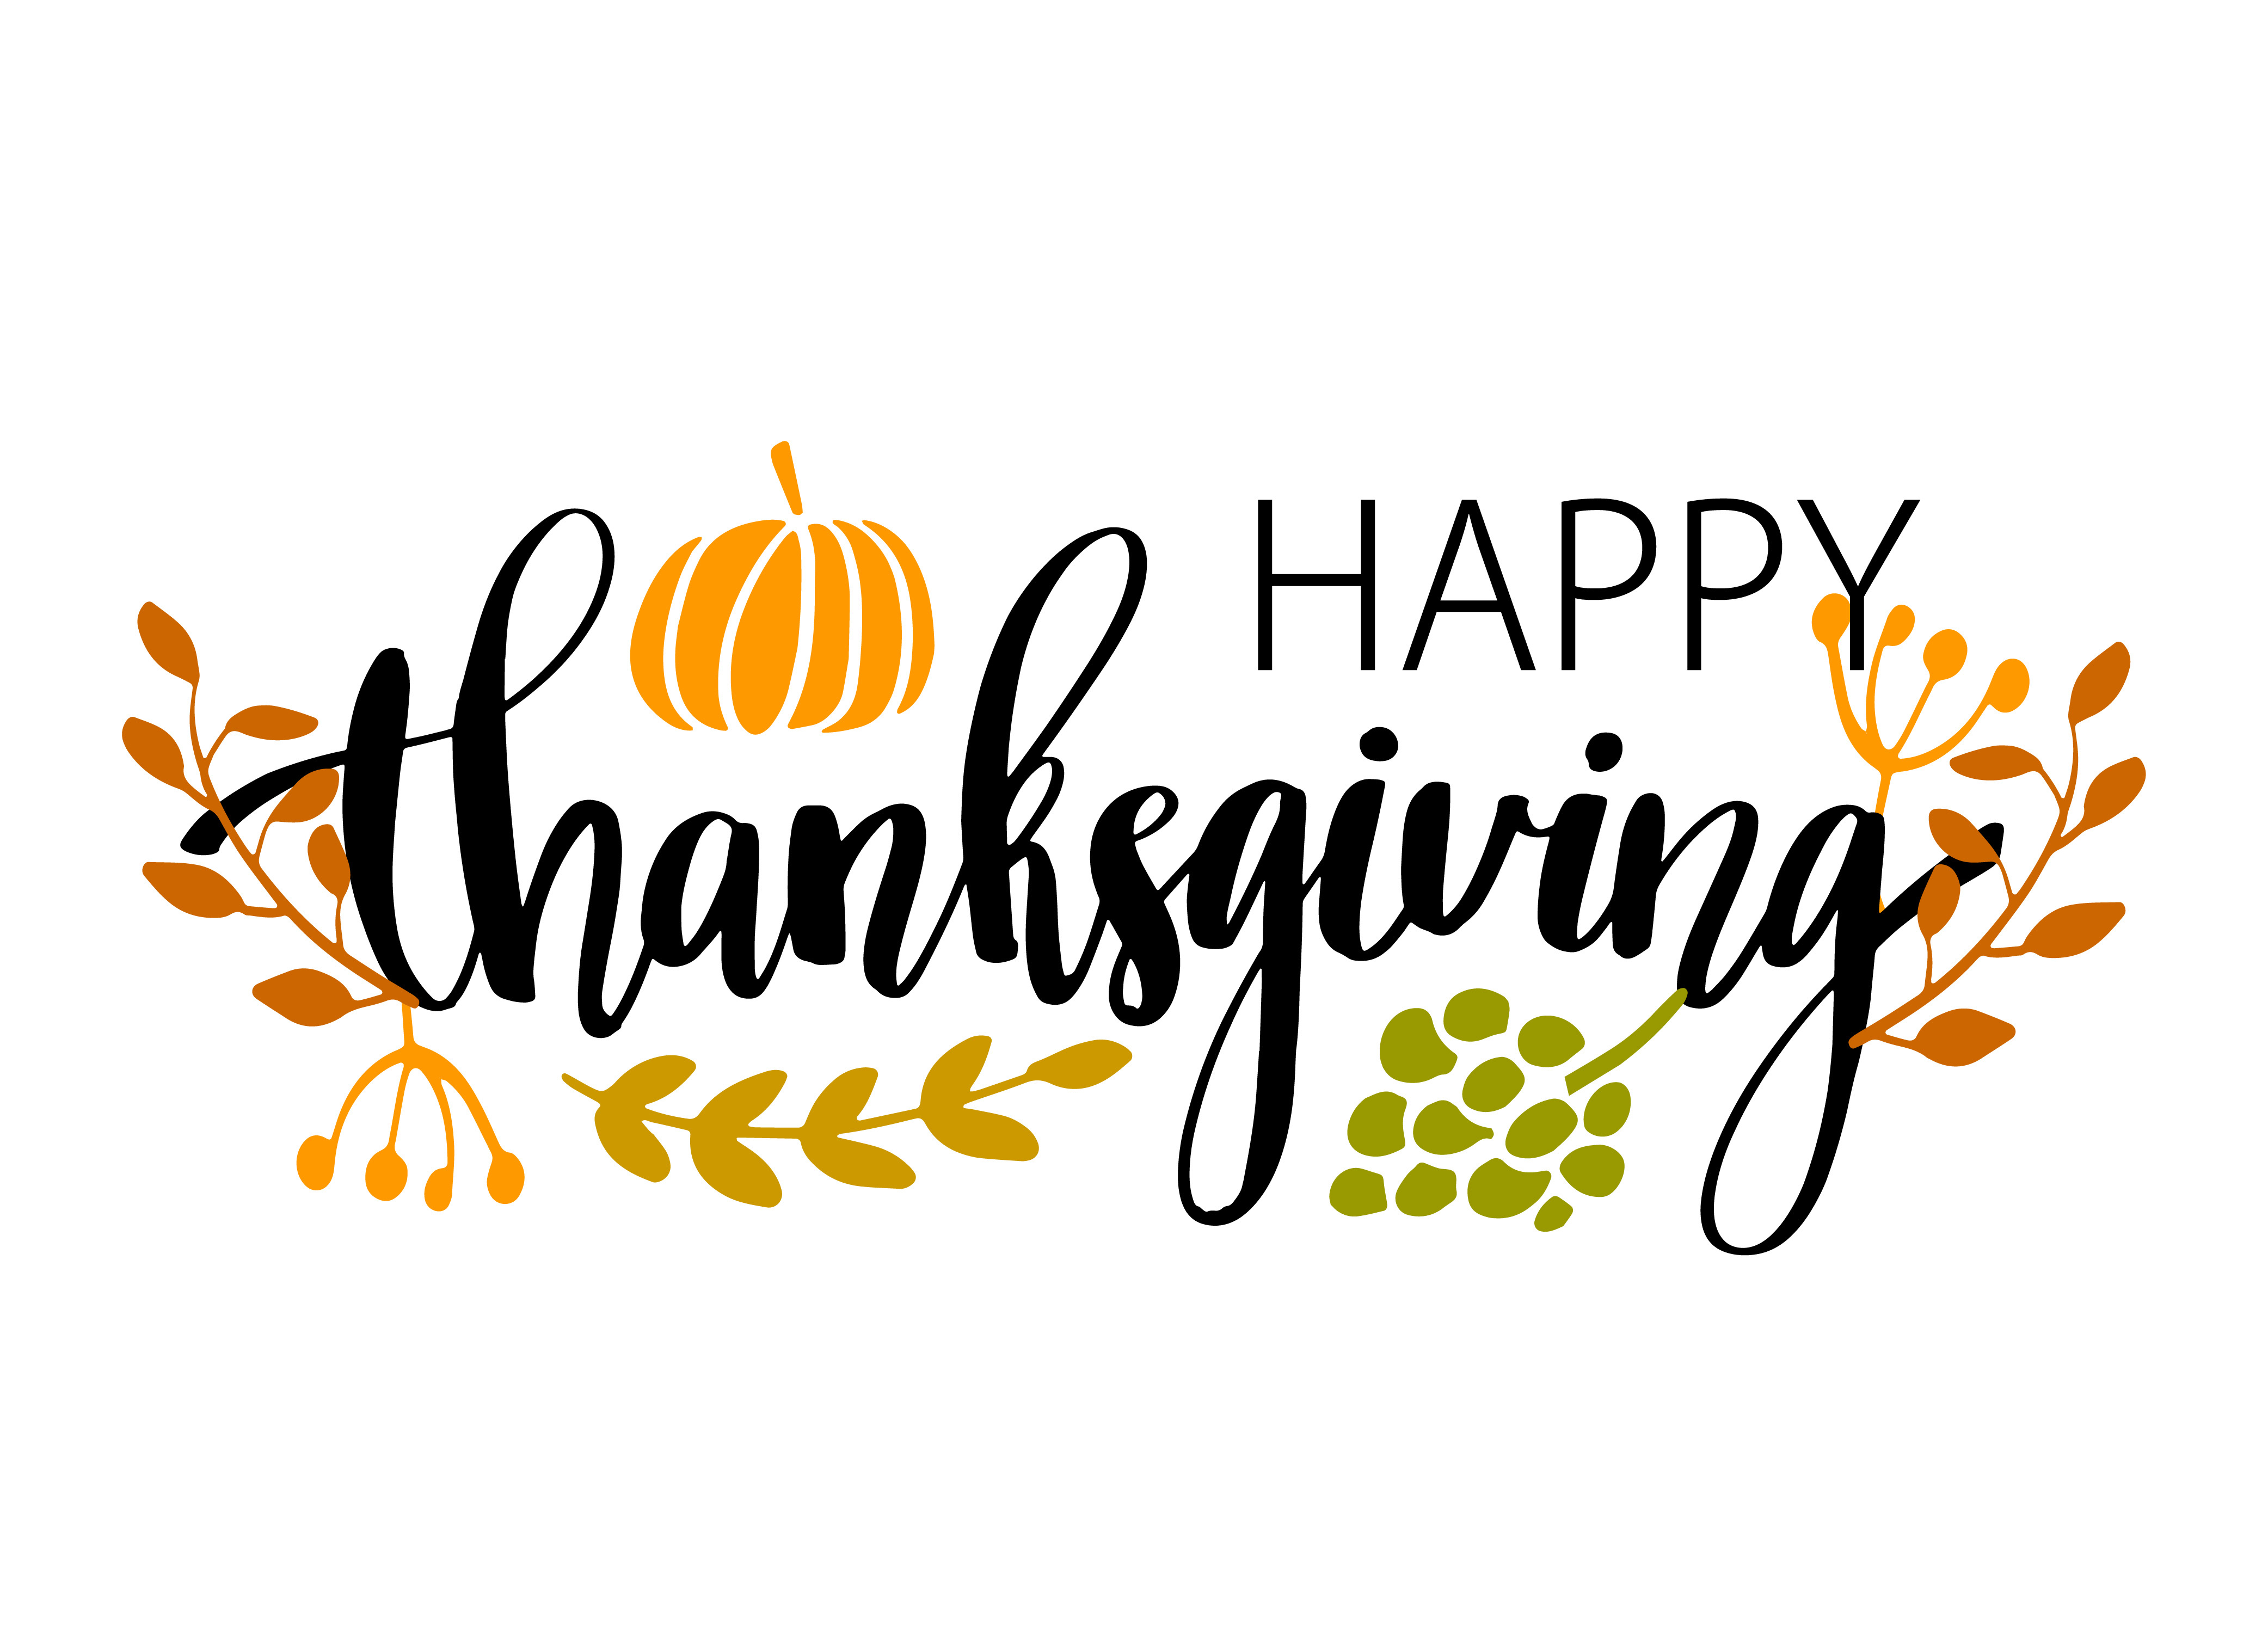 Happy Thanksgiving from the AST Family to Yours!